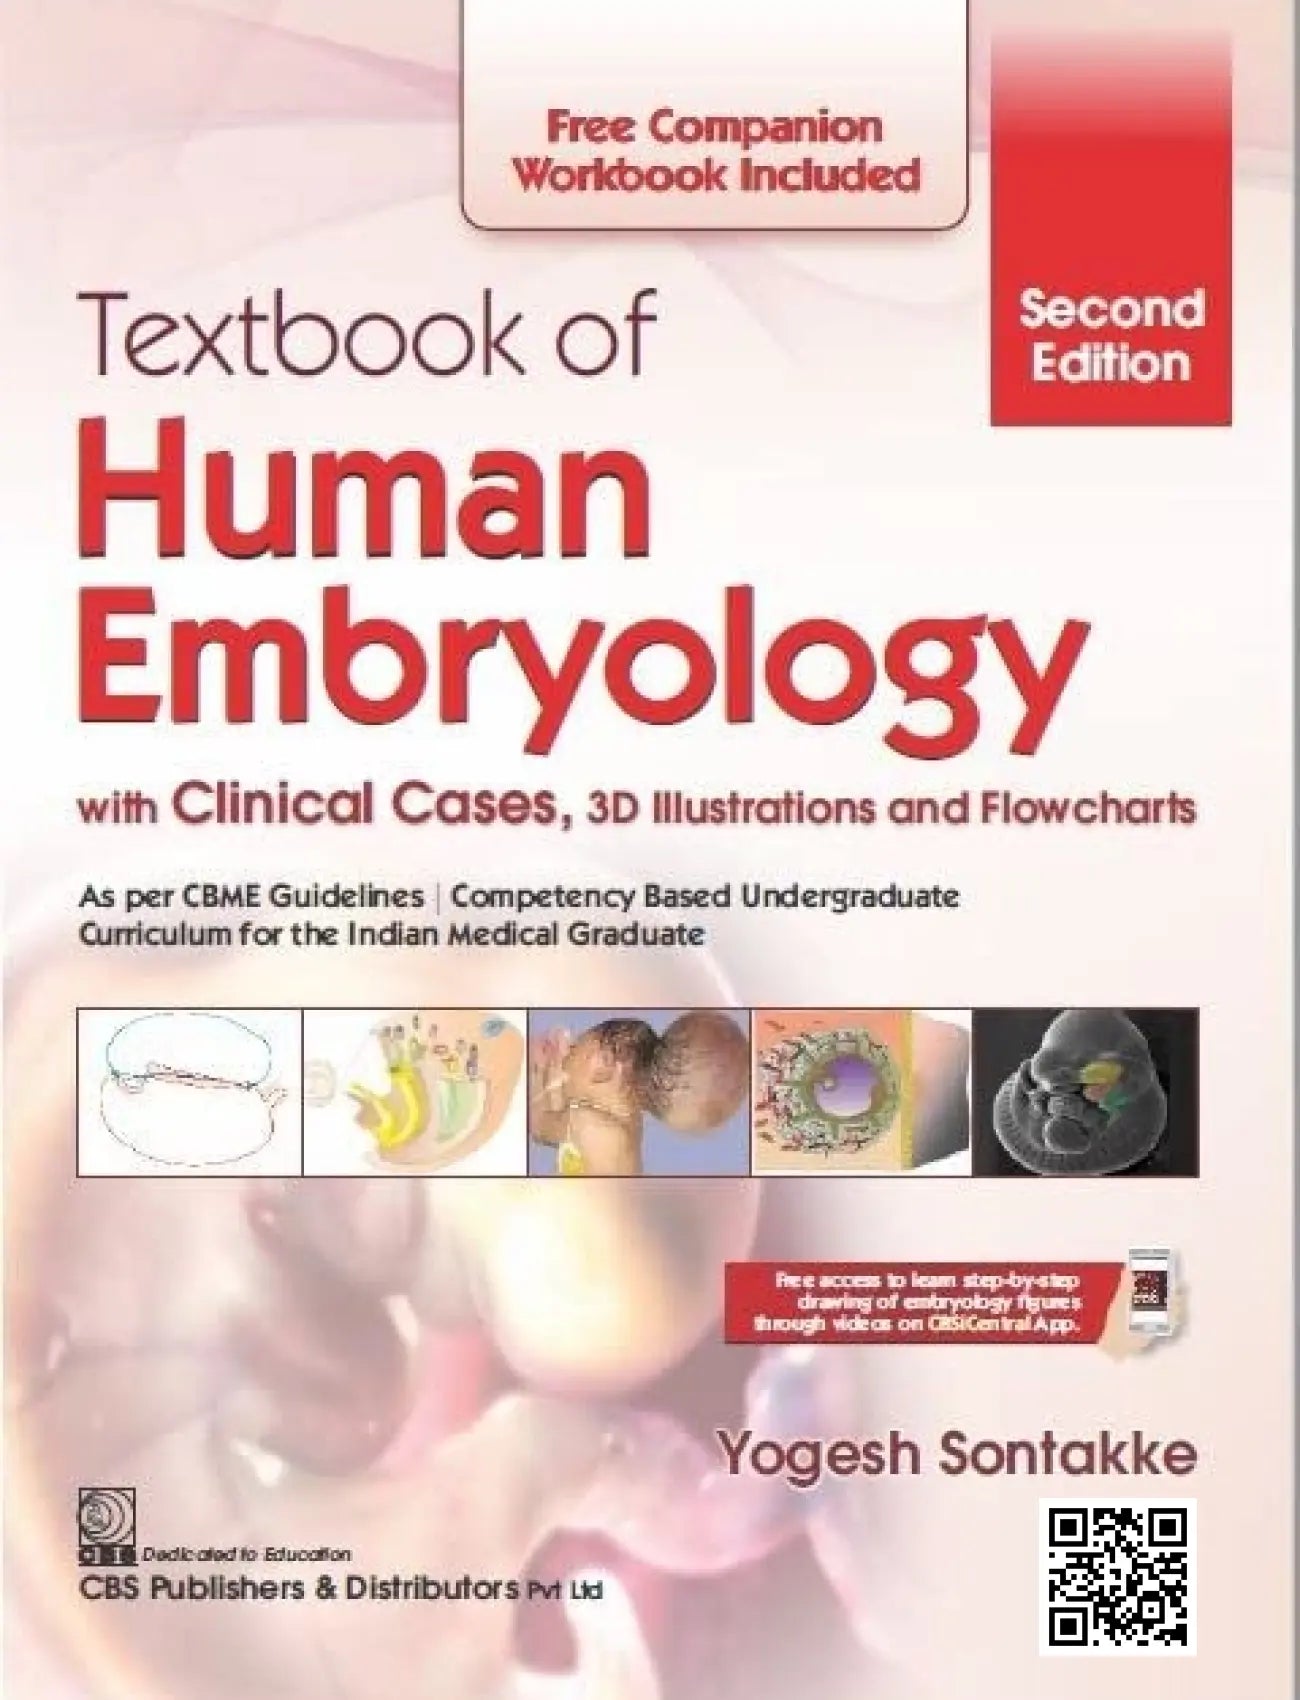 Textbook Of Human Embryology With Clinical Cases 3d Illustrations And Flowcharts 2ed